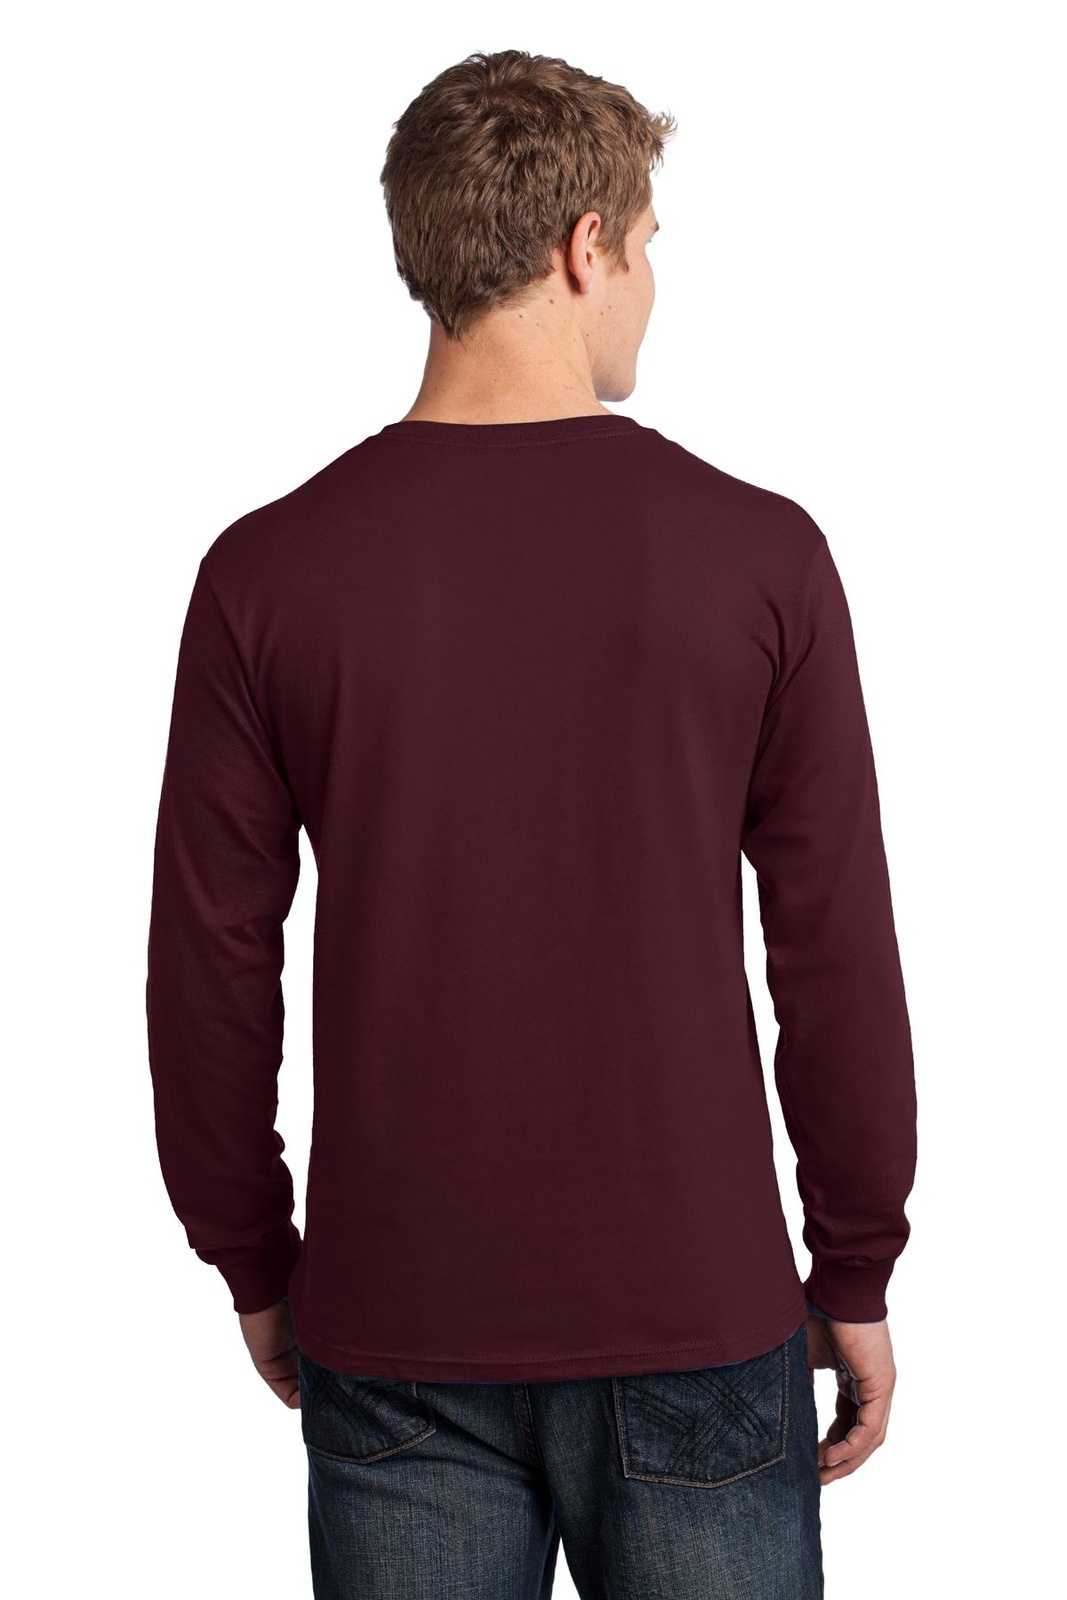 Port & Company PC54LS Long Sleeve Core Cotton Tee - Athletic Maroon - HIT a Double - 1